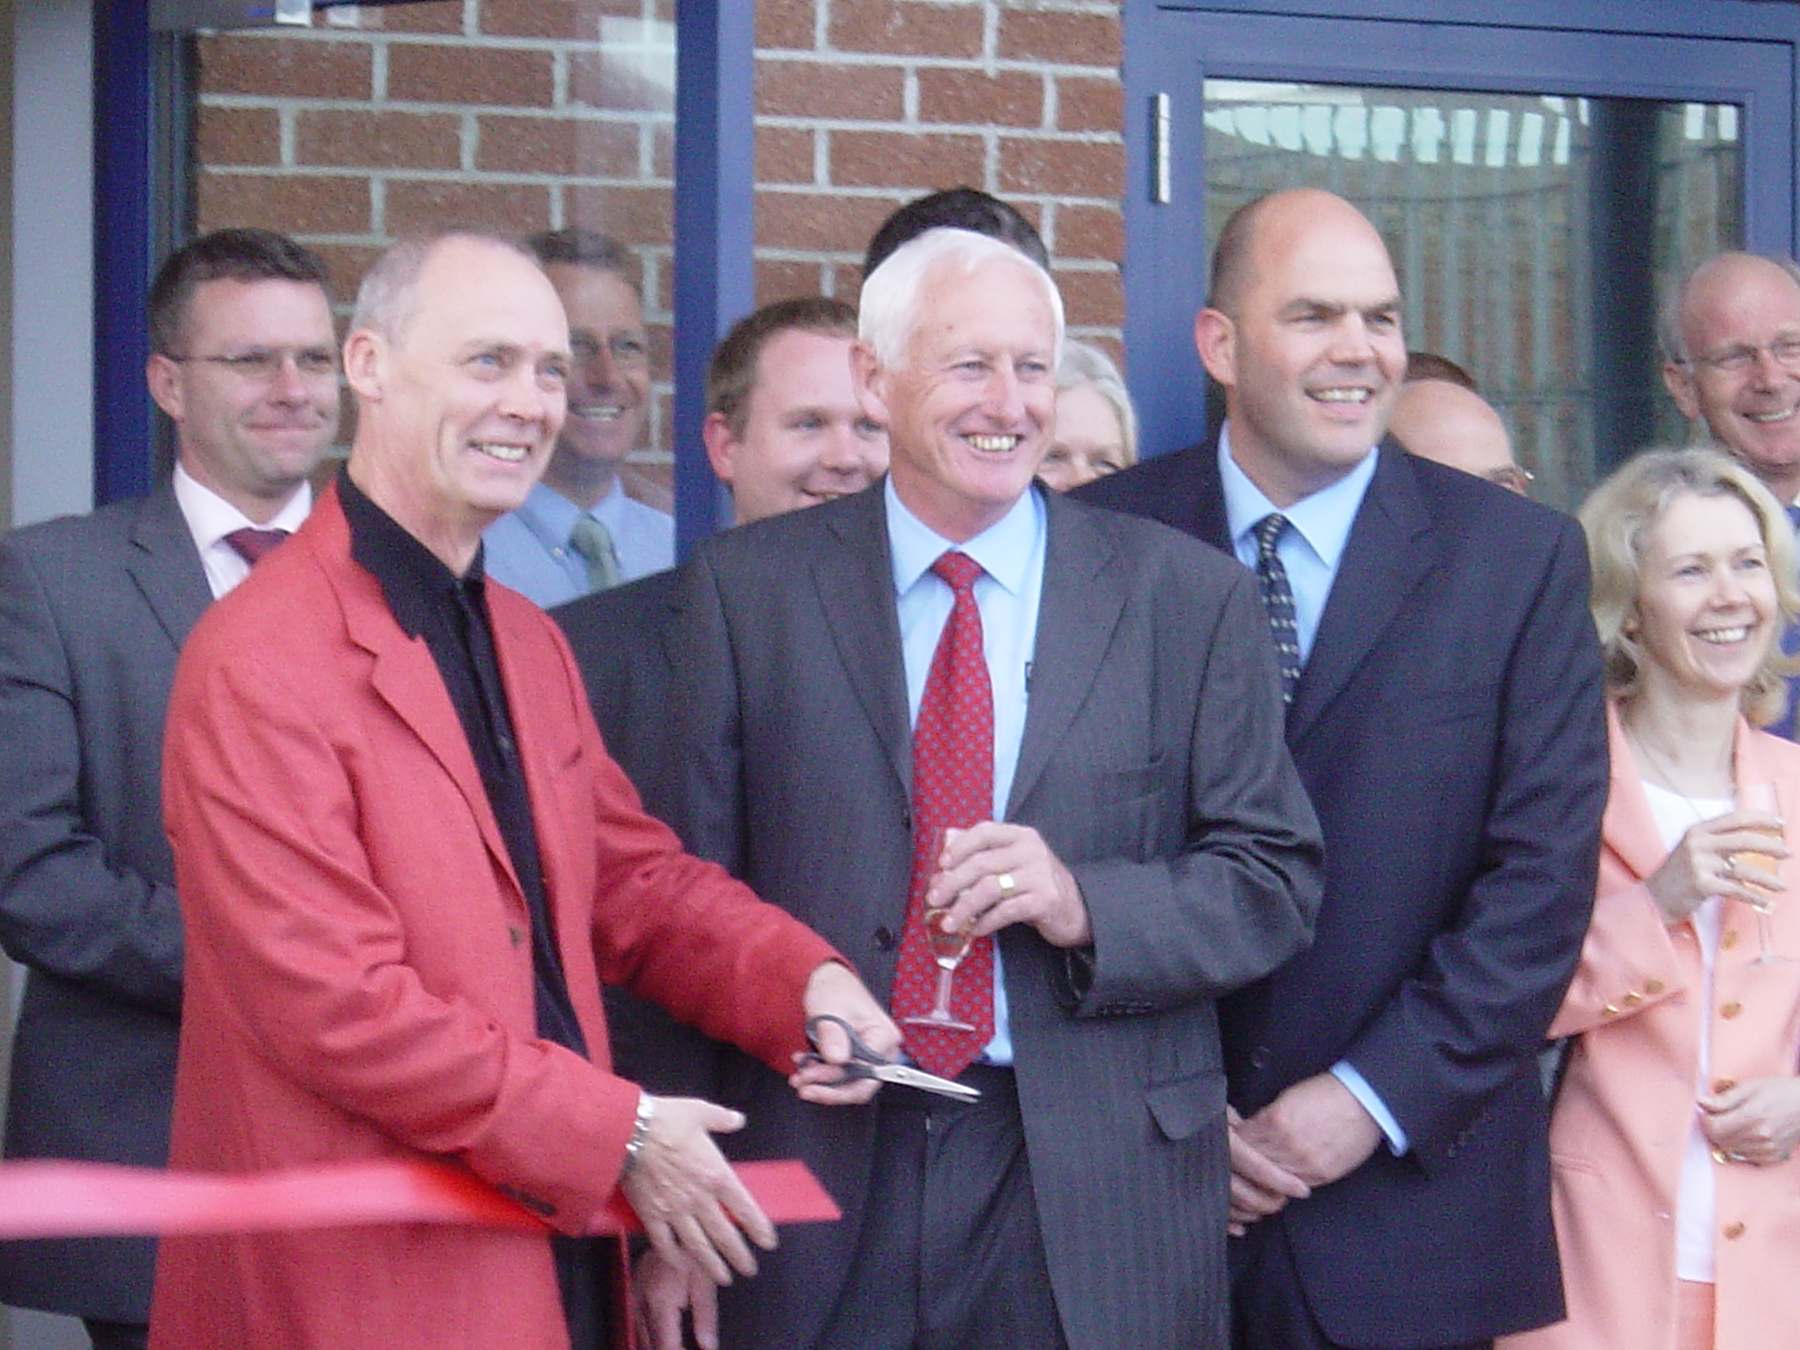 Grapevine staff and guests cut a red ribbon at the opening of our Poole Office.